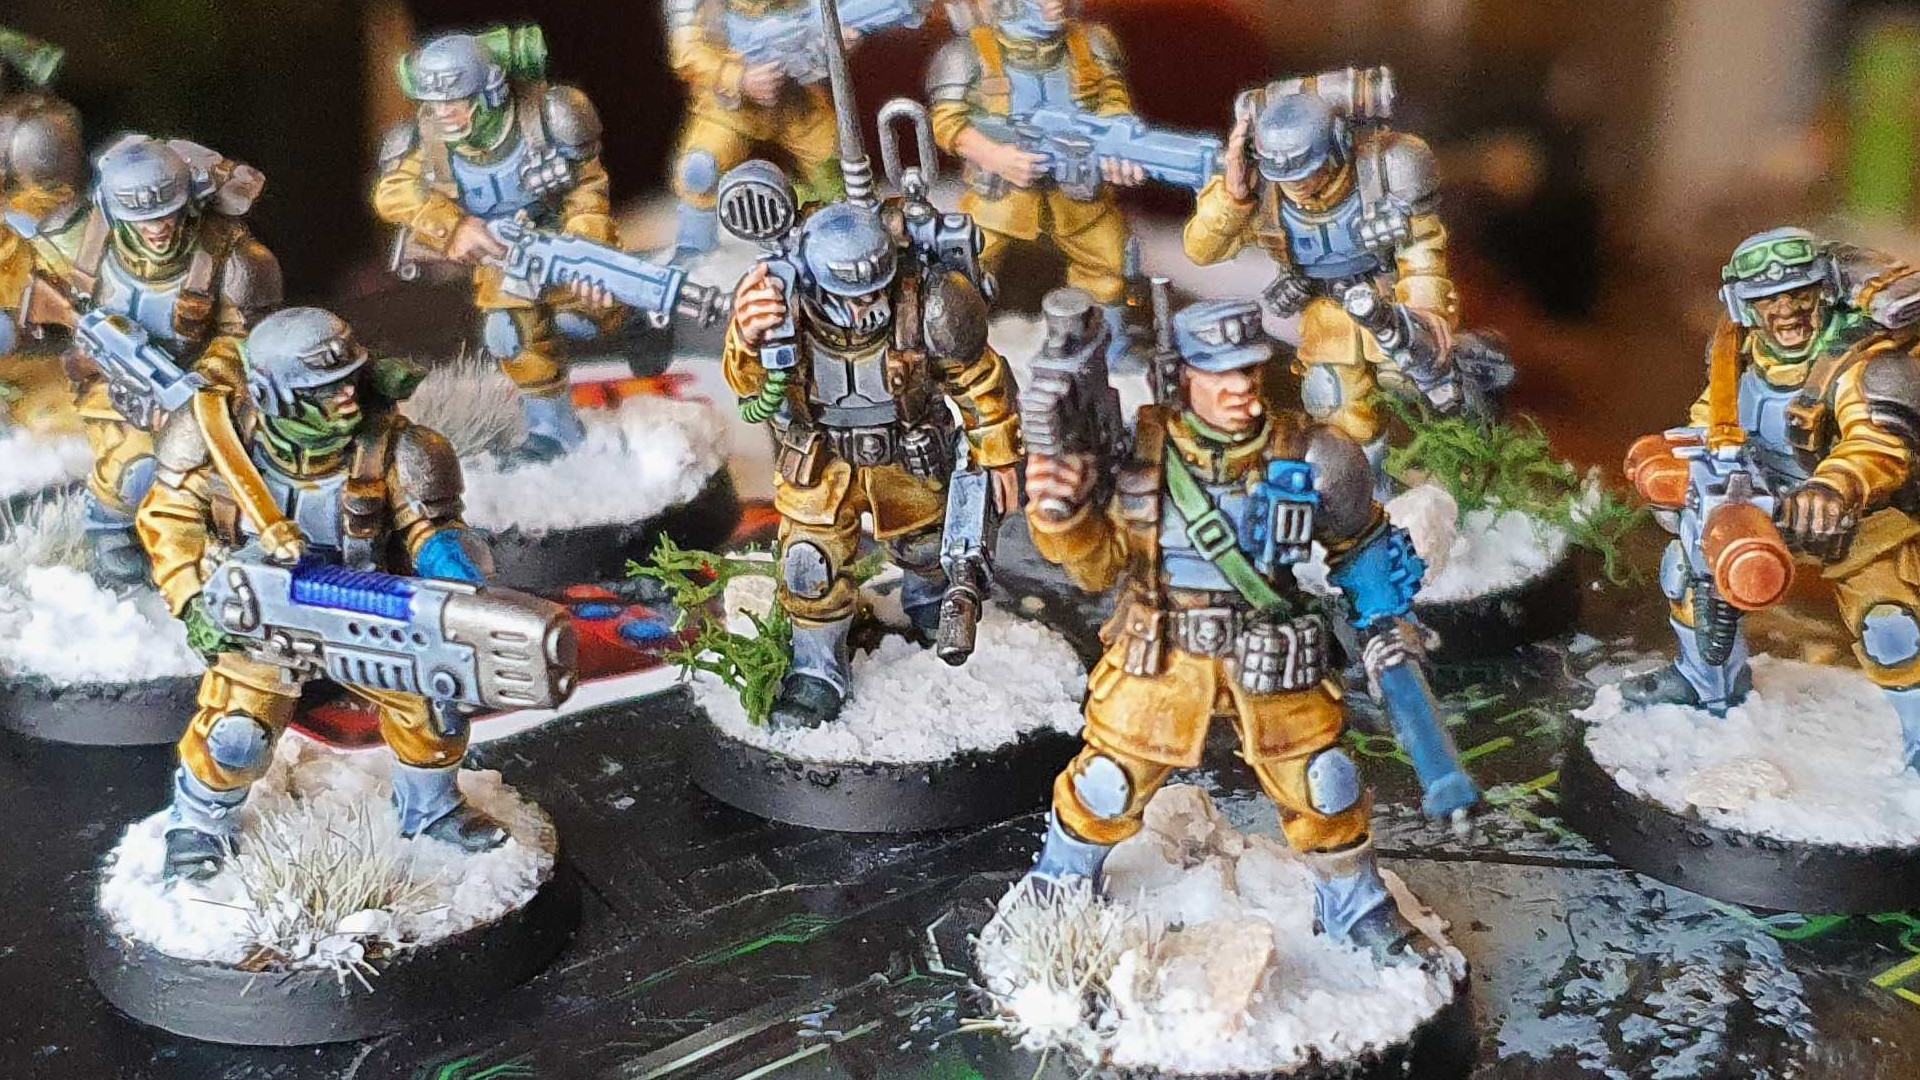 What would be a good starter set of contrast paints or equivalent